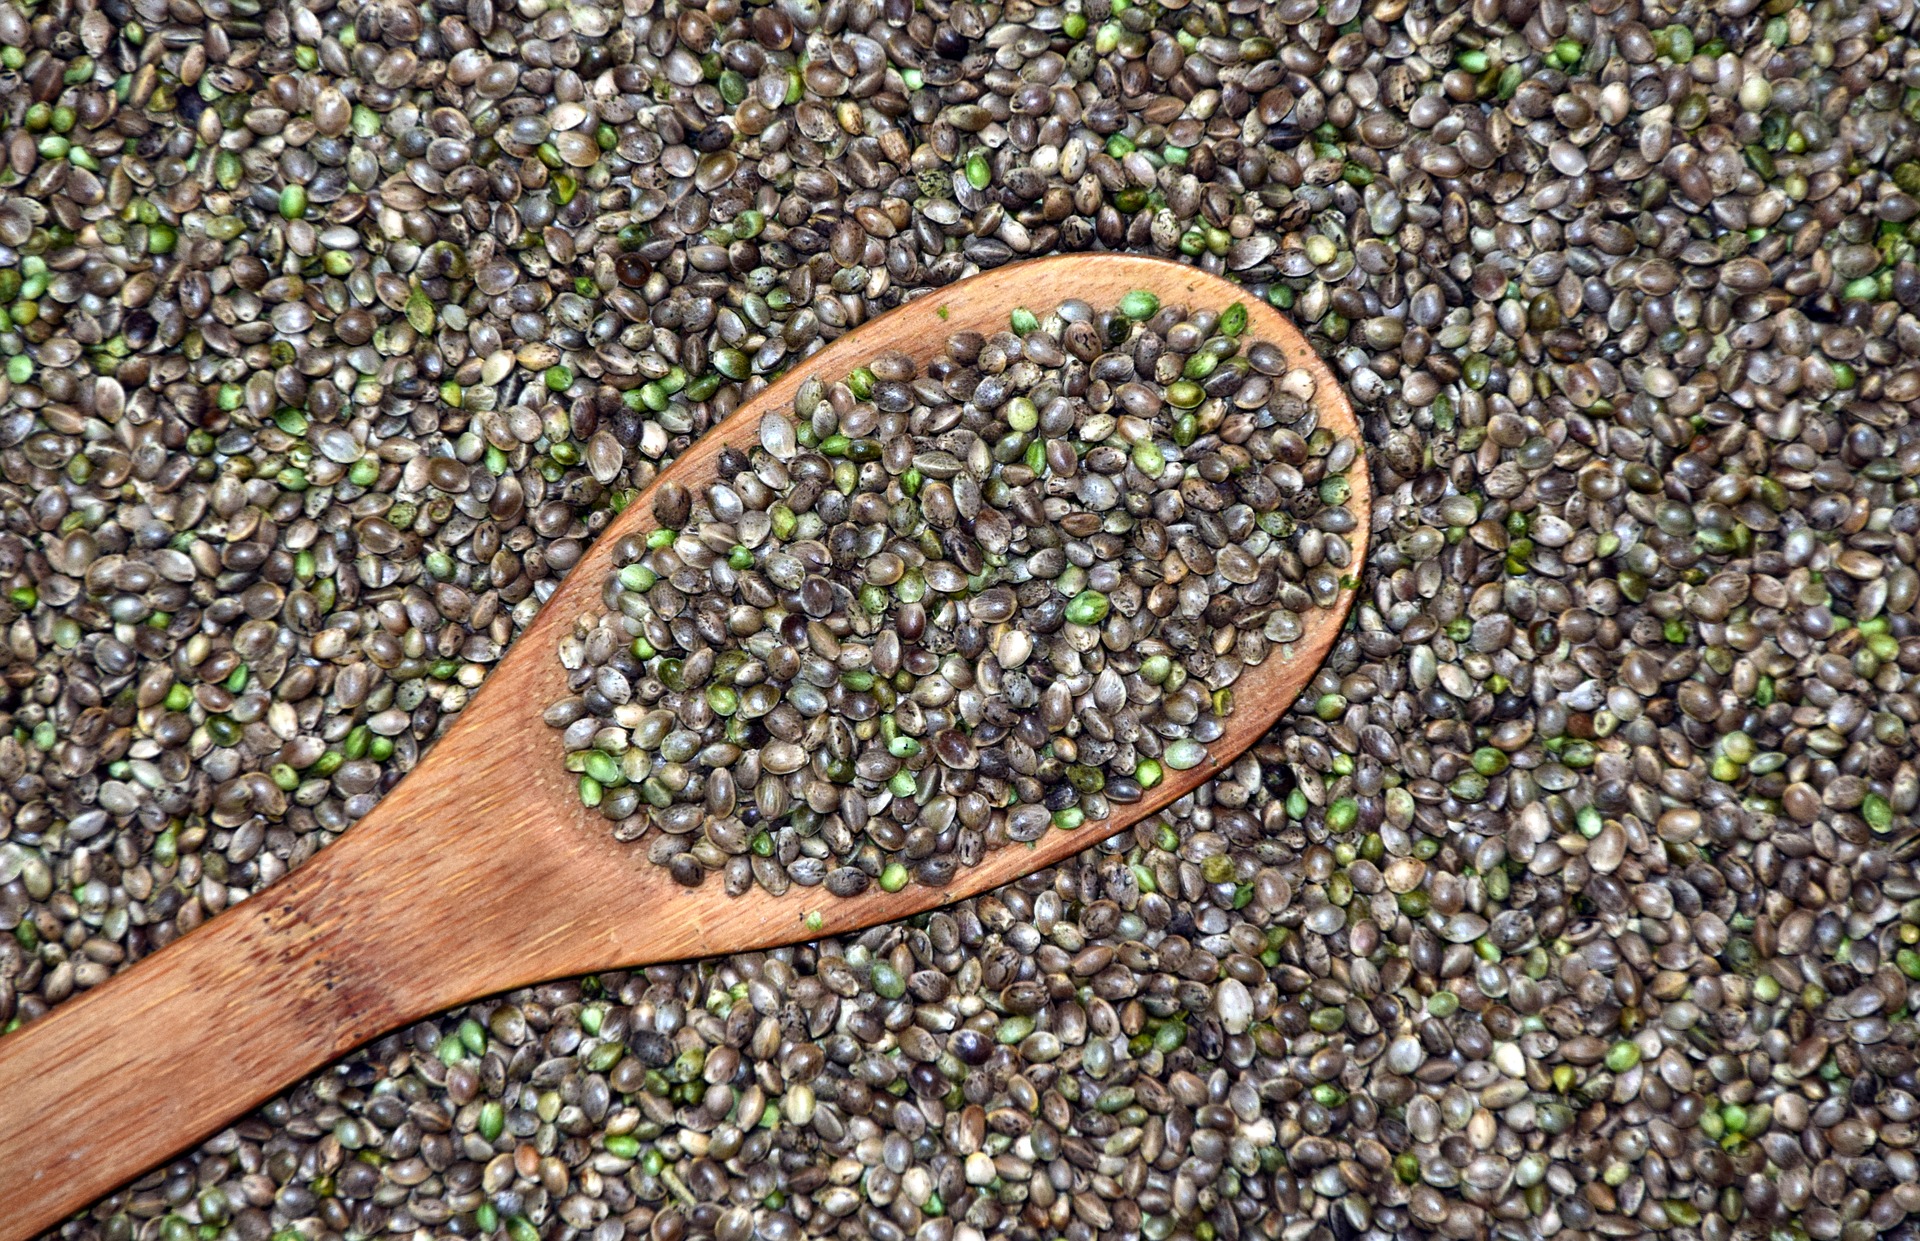 Hemp seeds contain up to 24% protein. Also, hemp seeds and oil contain Omega-3,6,9, other essential fatty acids and polyunsaturated fatty acids the body needs but cannot produce itself.